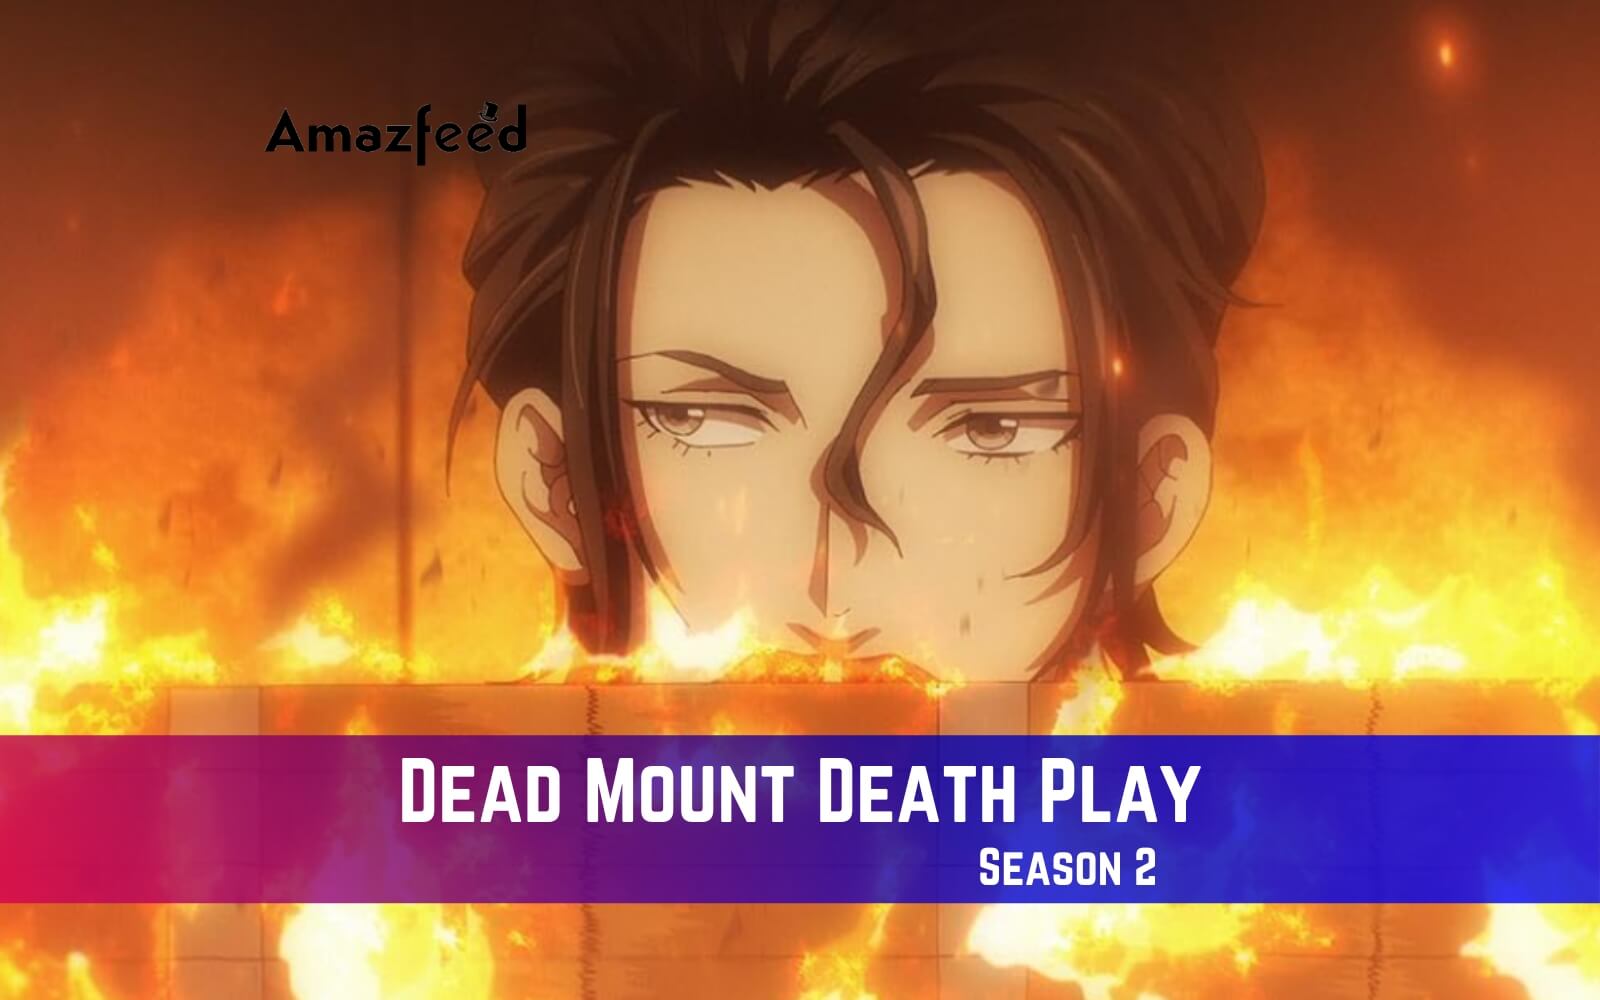 Dead Mount Death Play Cour 2 release date announced with official